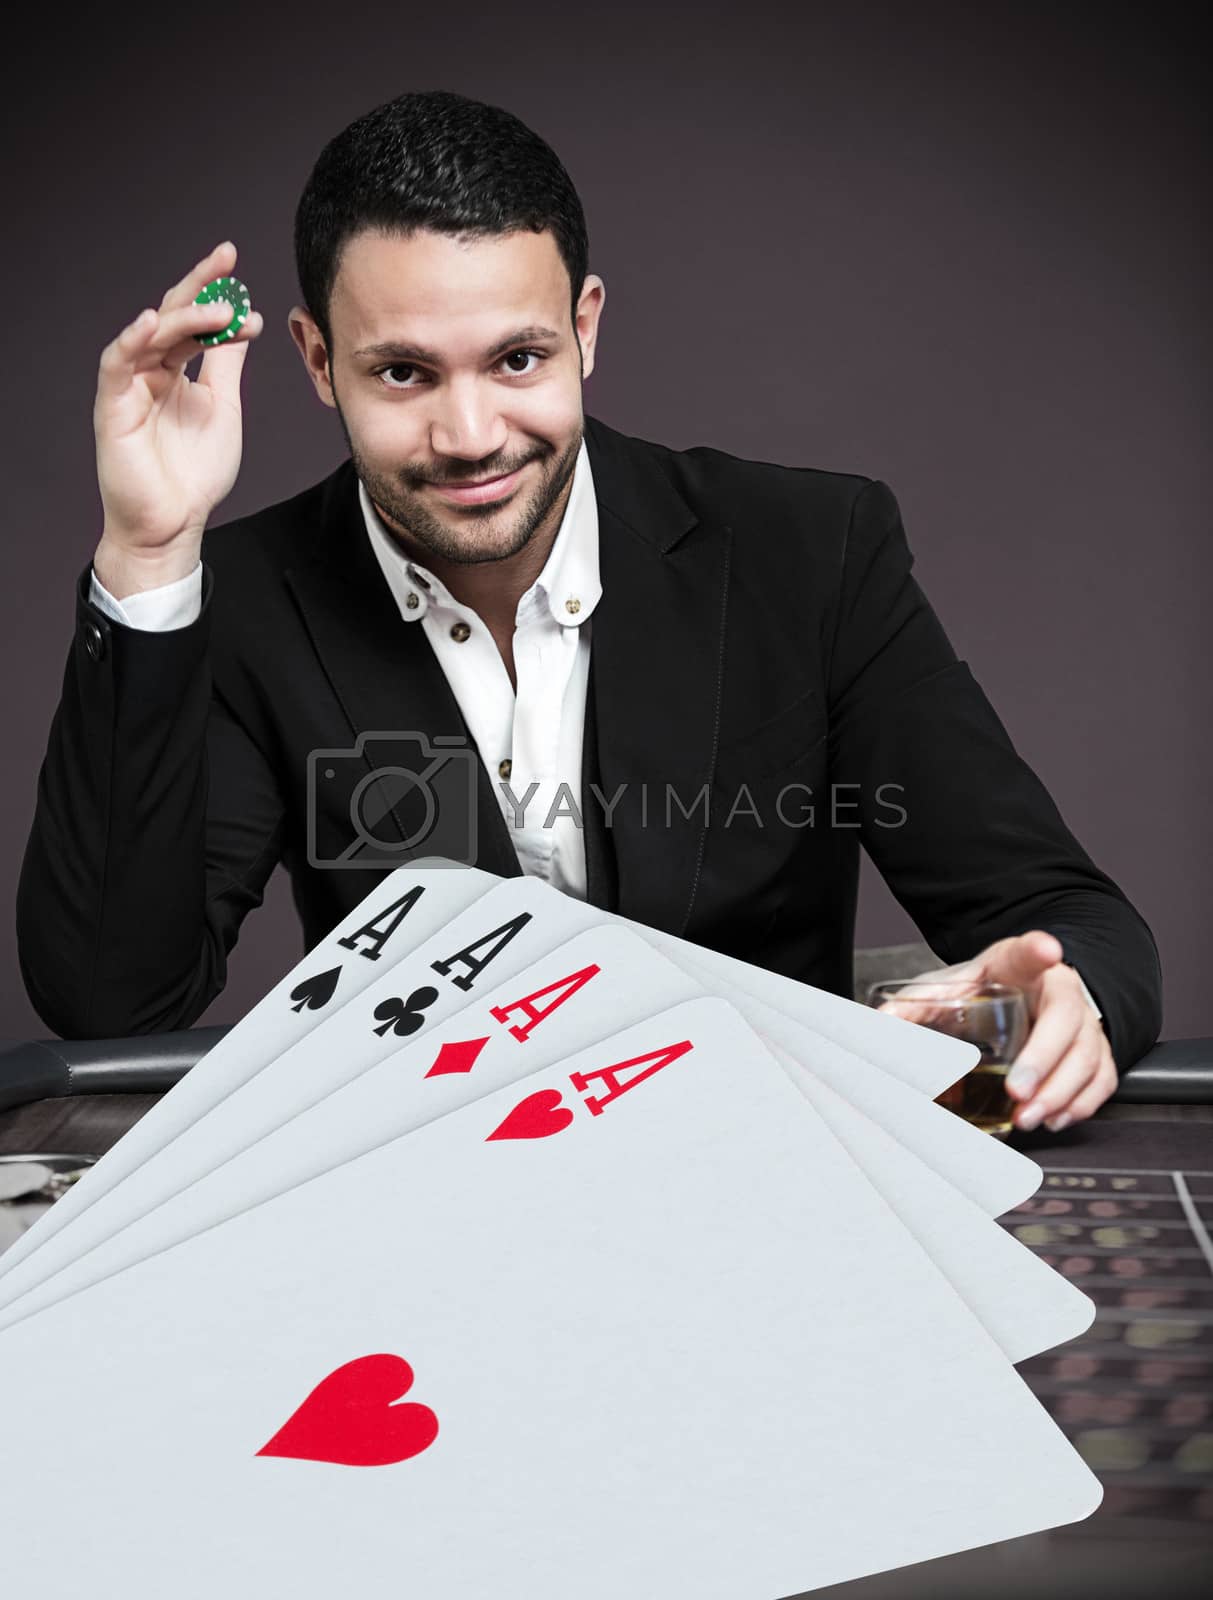 Royalty free image of Handsome gambler betting on four aces at poker table by Wavebreakmedia